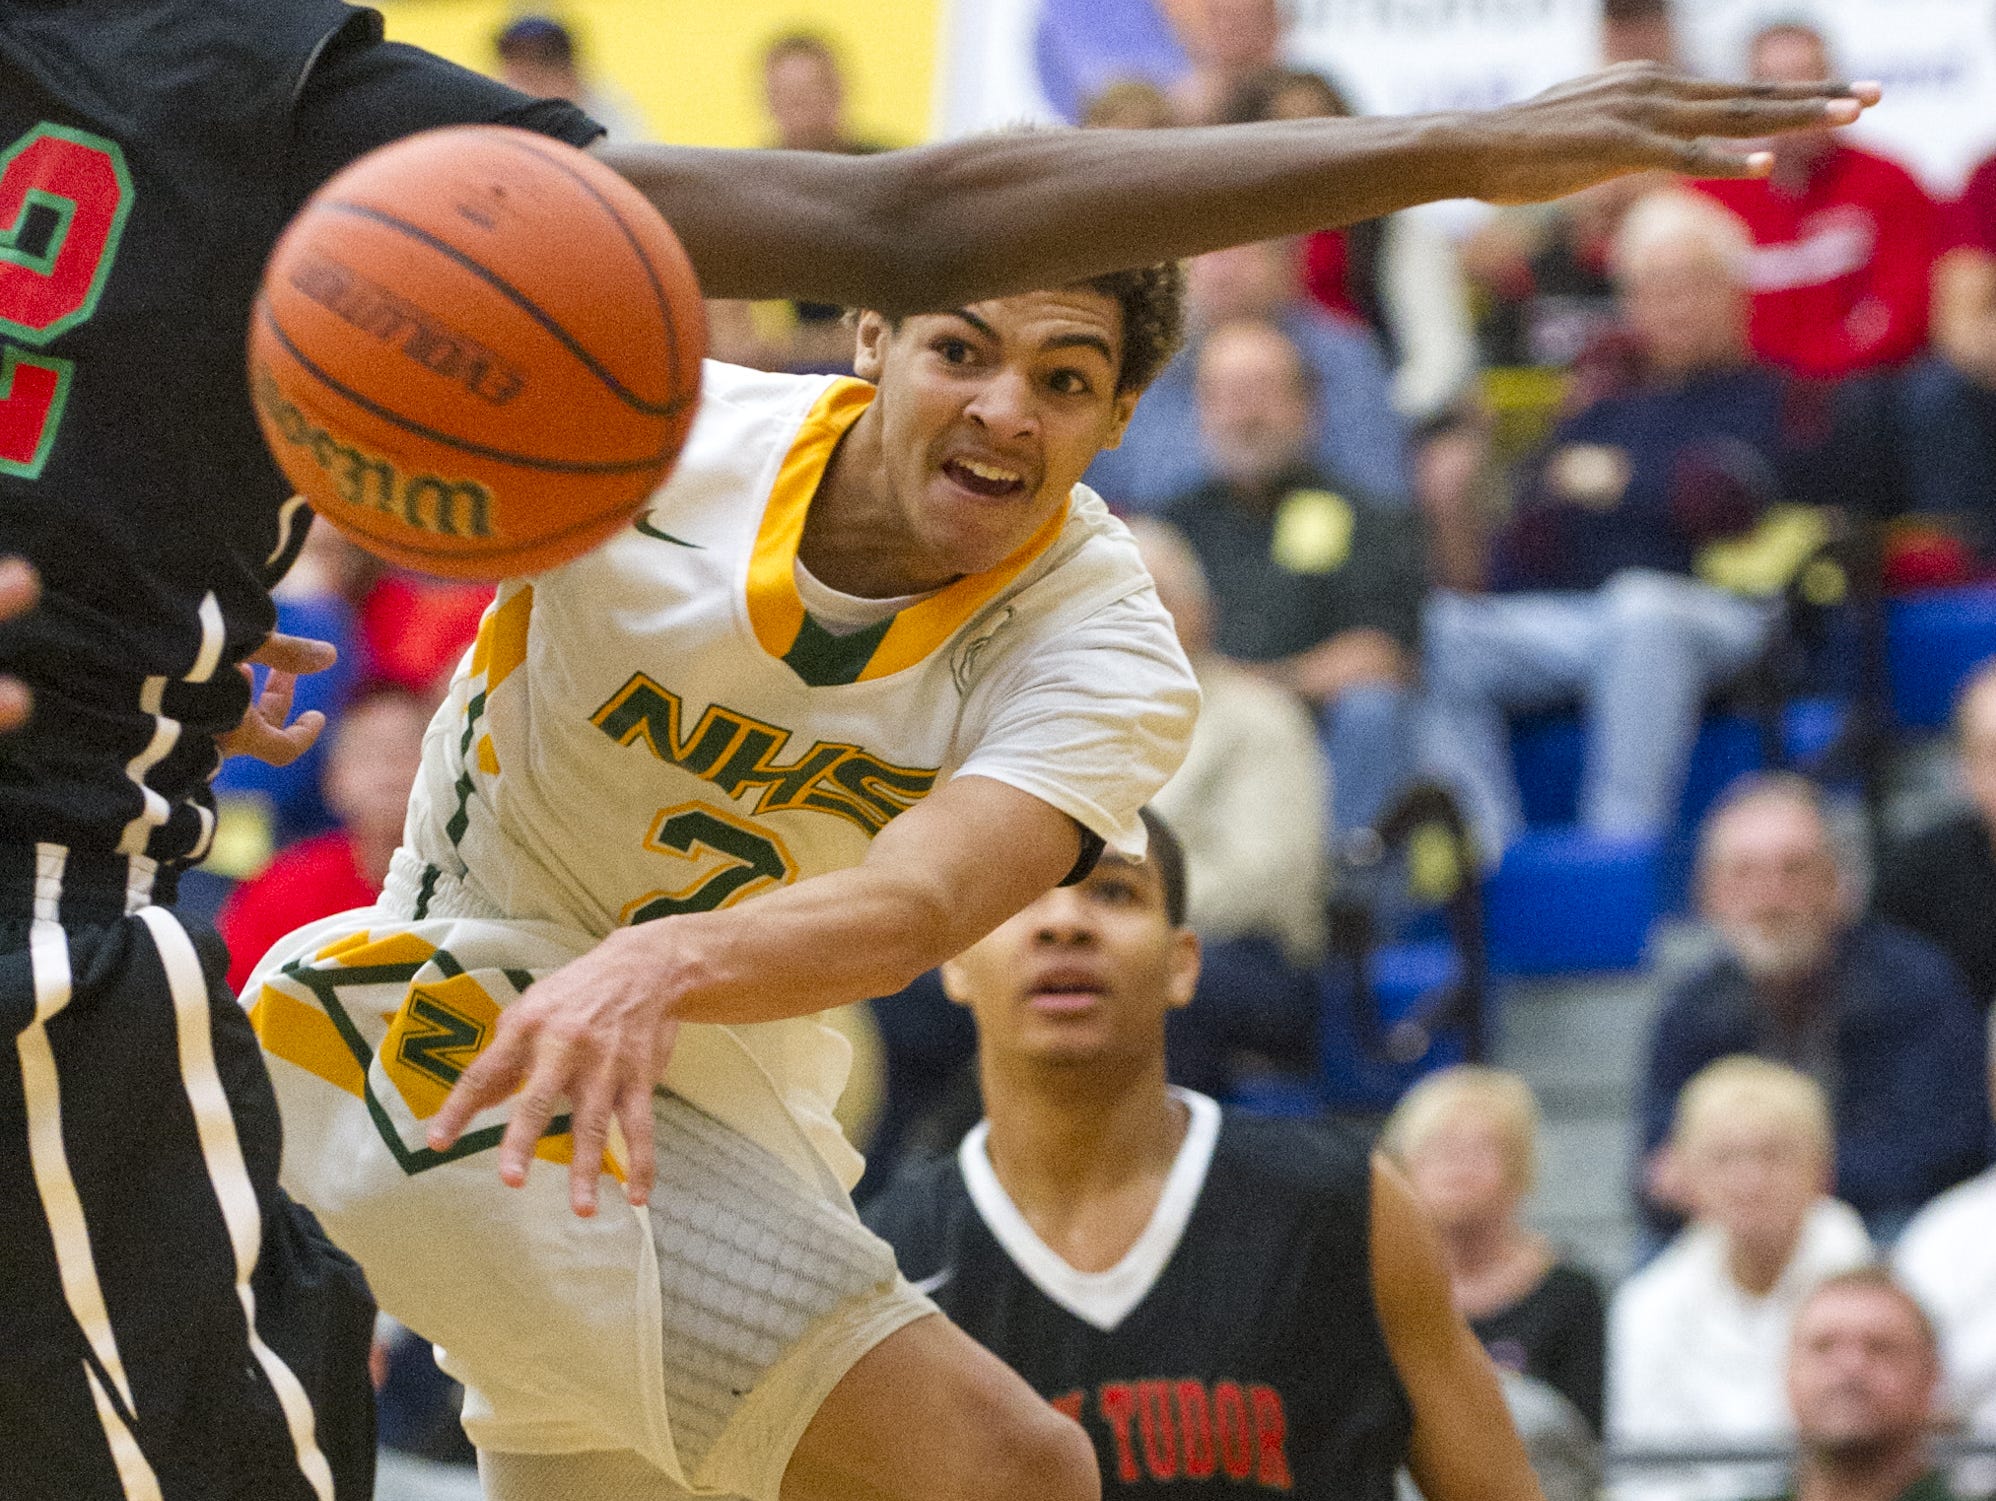 Northeastern High School sophomore Tyler Smith (2) fires off a pass after having his route to the basket blocked by Park Tudor High School sophomore Jaren Jackson, Jr. (32) during the first half of action. Greenfield-Central High School hosted the IHSAA Regional Boy's 2A Basketball tournament Saturday, March 14, 2015.